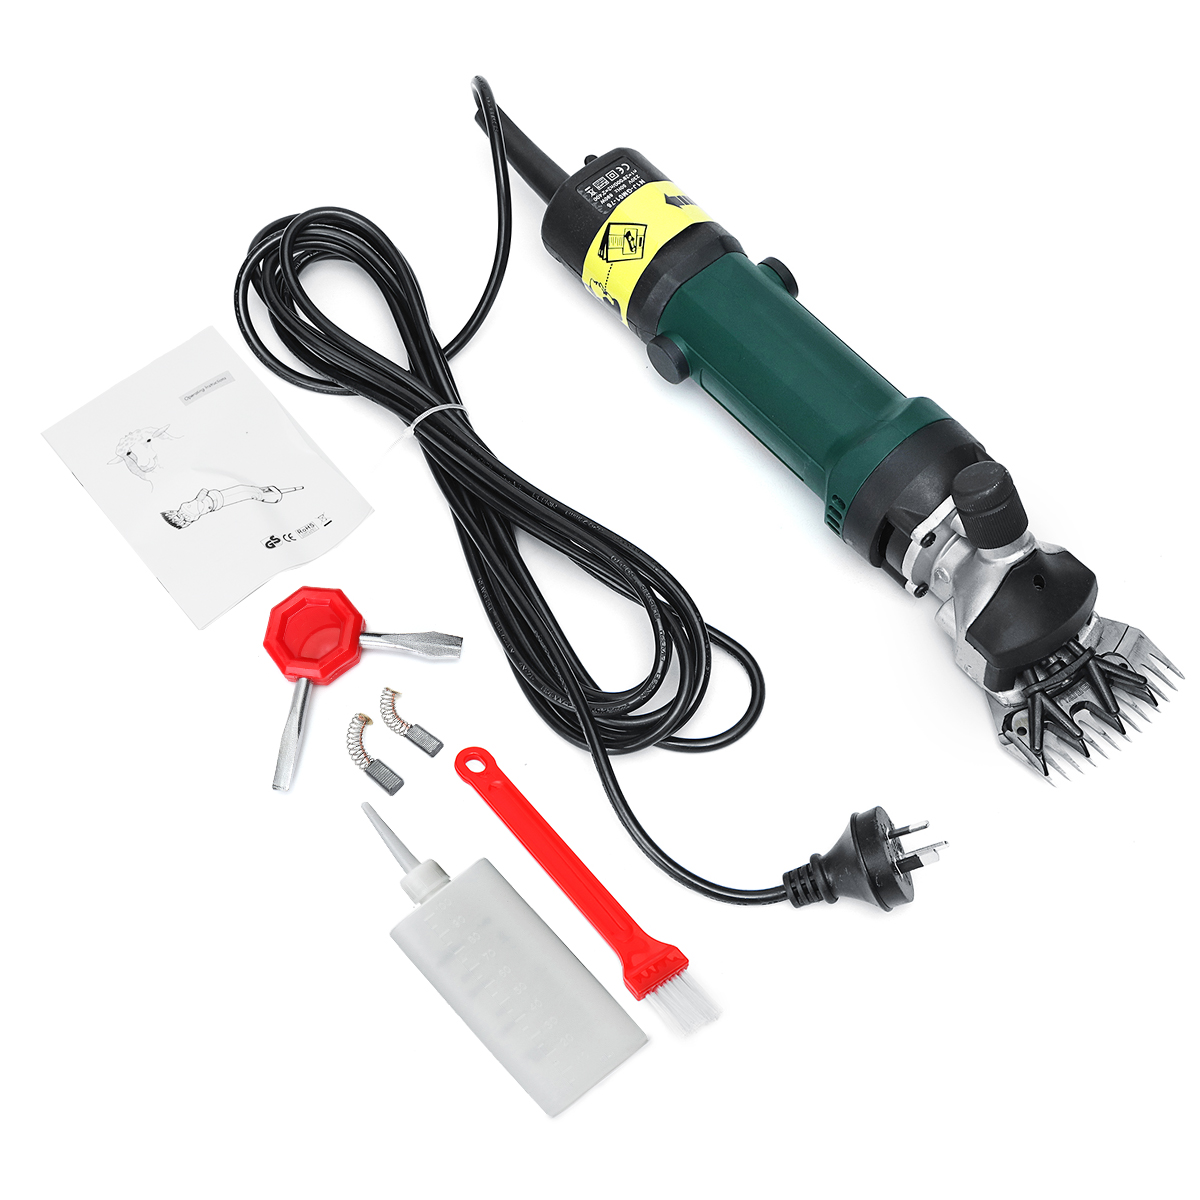 690W-6-Speed-Adjustable-Electric-Sheep-Shearing-Clipper-Shears-Goats-Hair-Removal-Trimmer-1323344-5